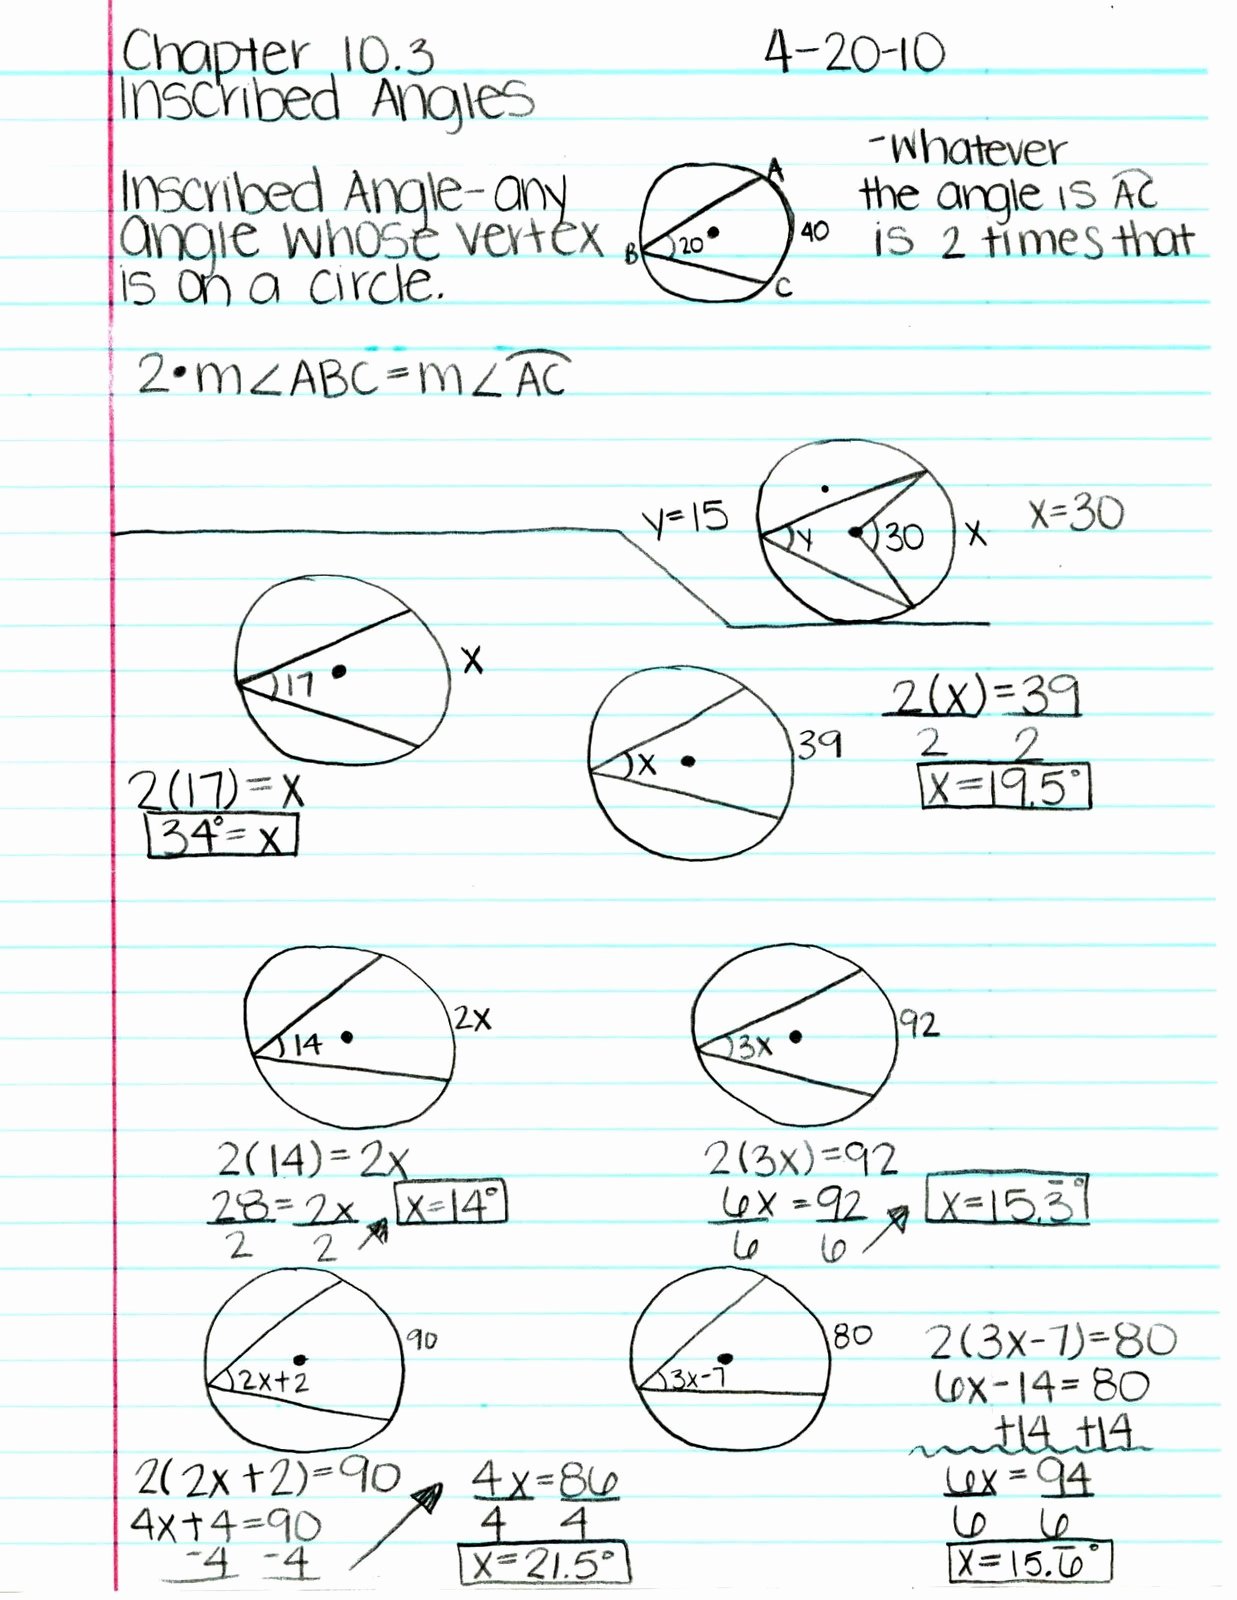 Central and Inscribed Angle Worksheet Luxury Mr Ryals Geometry Blog April 2010